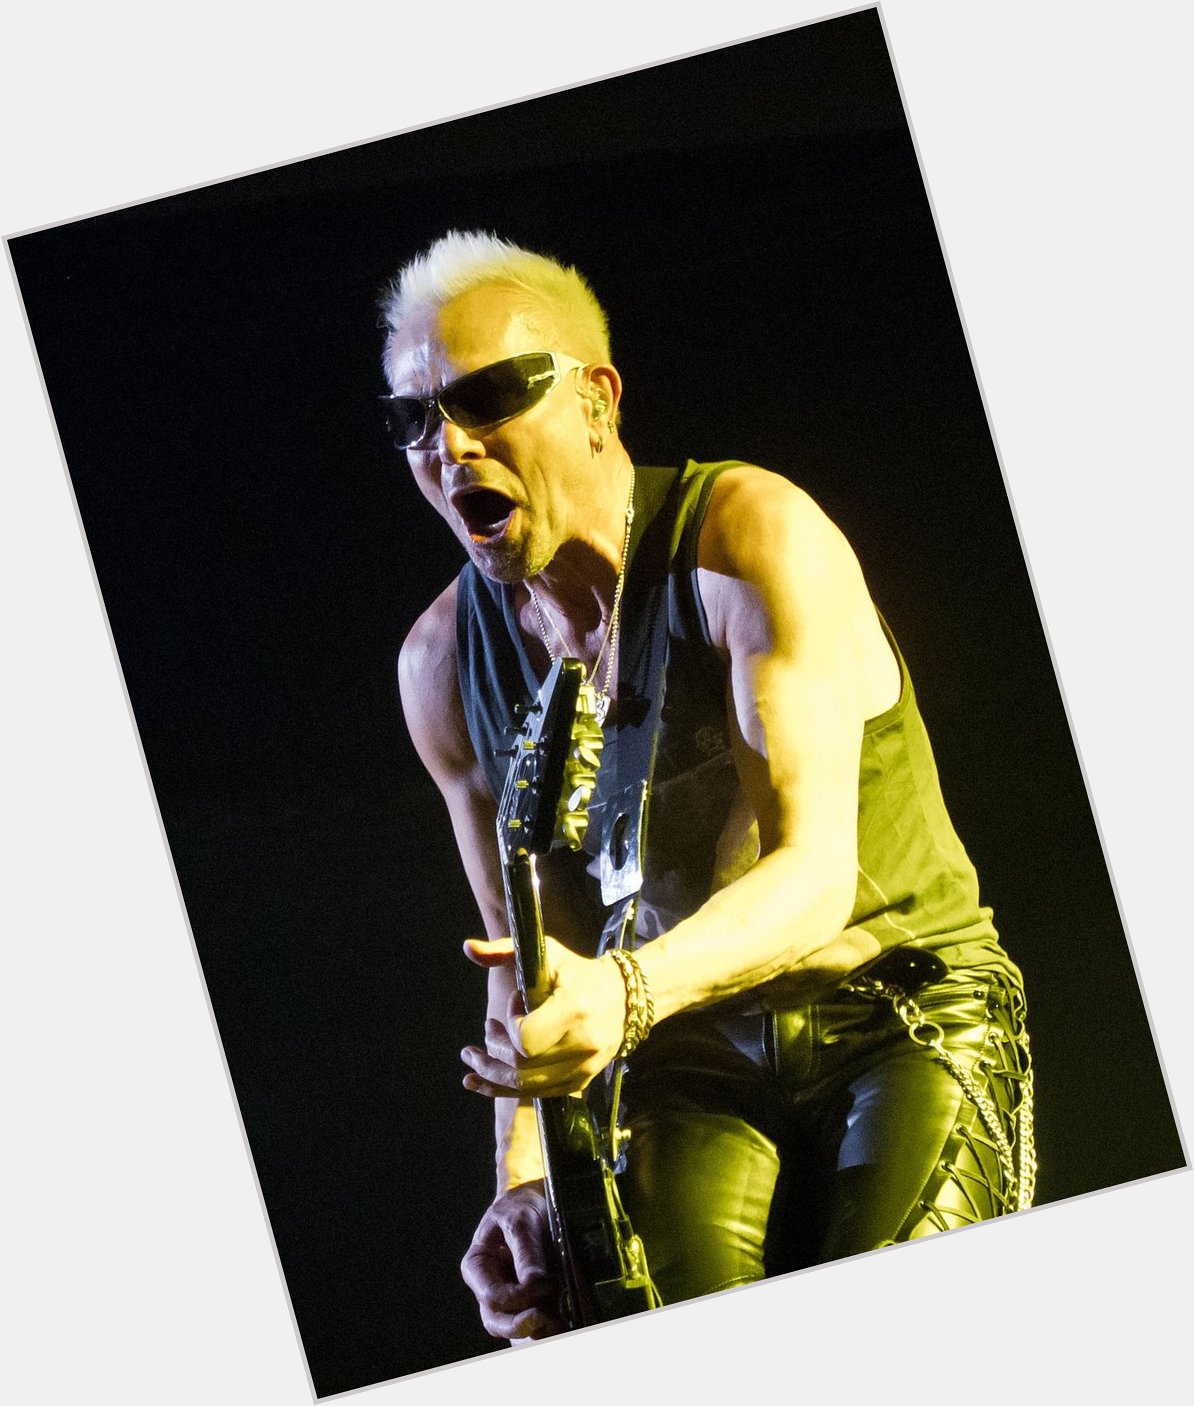 Wishing a happy birthday to Rudolf Schenker from  See you in 17 days for the Rock Believer Tour! 